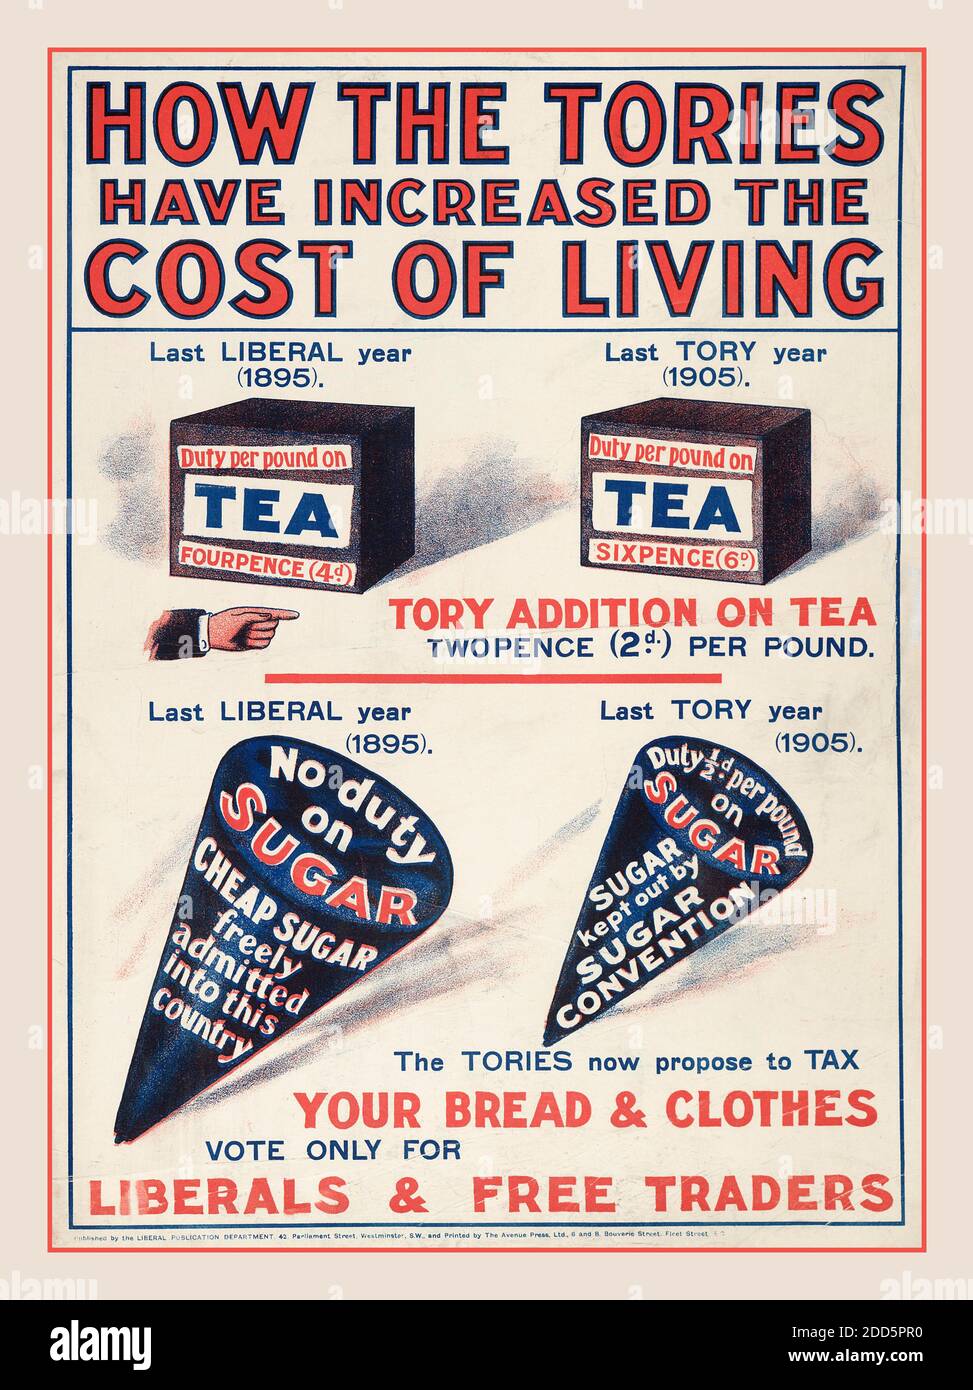 Vintage LIBERAL PARTY 1900's political election propaganda poster UK 'HOW THE TORIES HAVE INCREASED THE COST OF LIVING' Blue and red ink on white paper, illustrating the increase in the tax price of tea and sugar under a Tory government (Tory government of 1905 compared to Liberal government of 1895), produced for the Liberal Party. Printer: Avenue Press London Date: c1905-c1910 Stock Photo